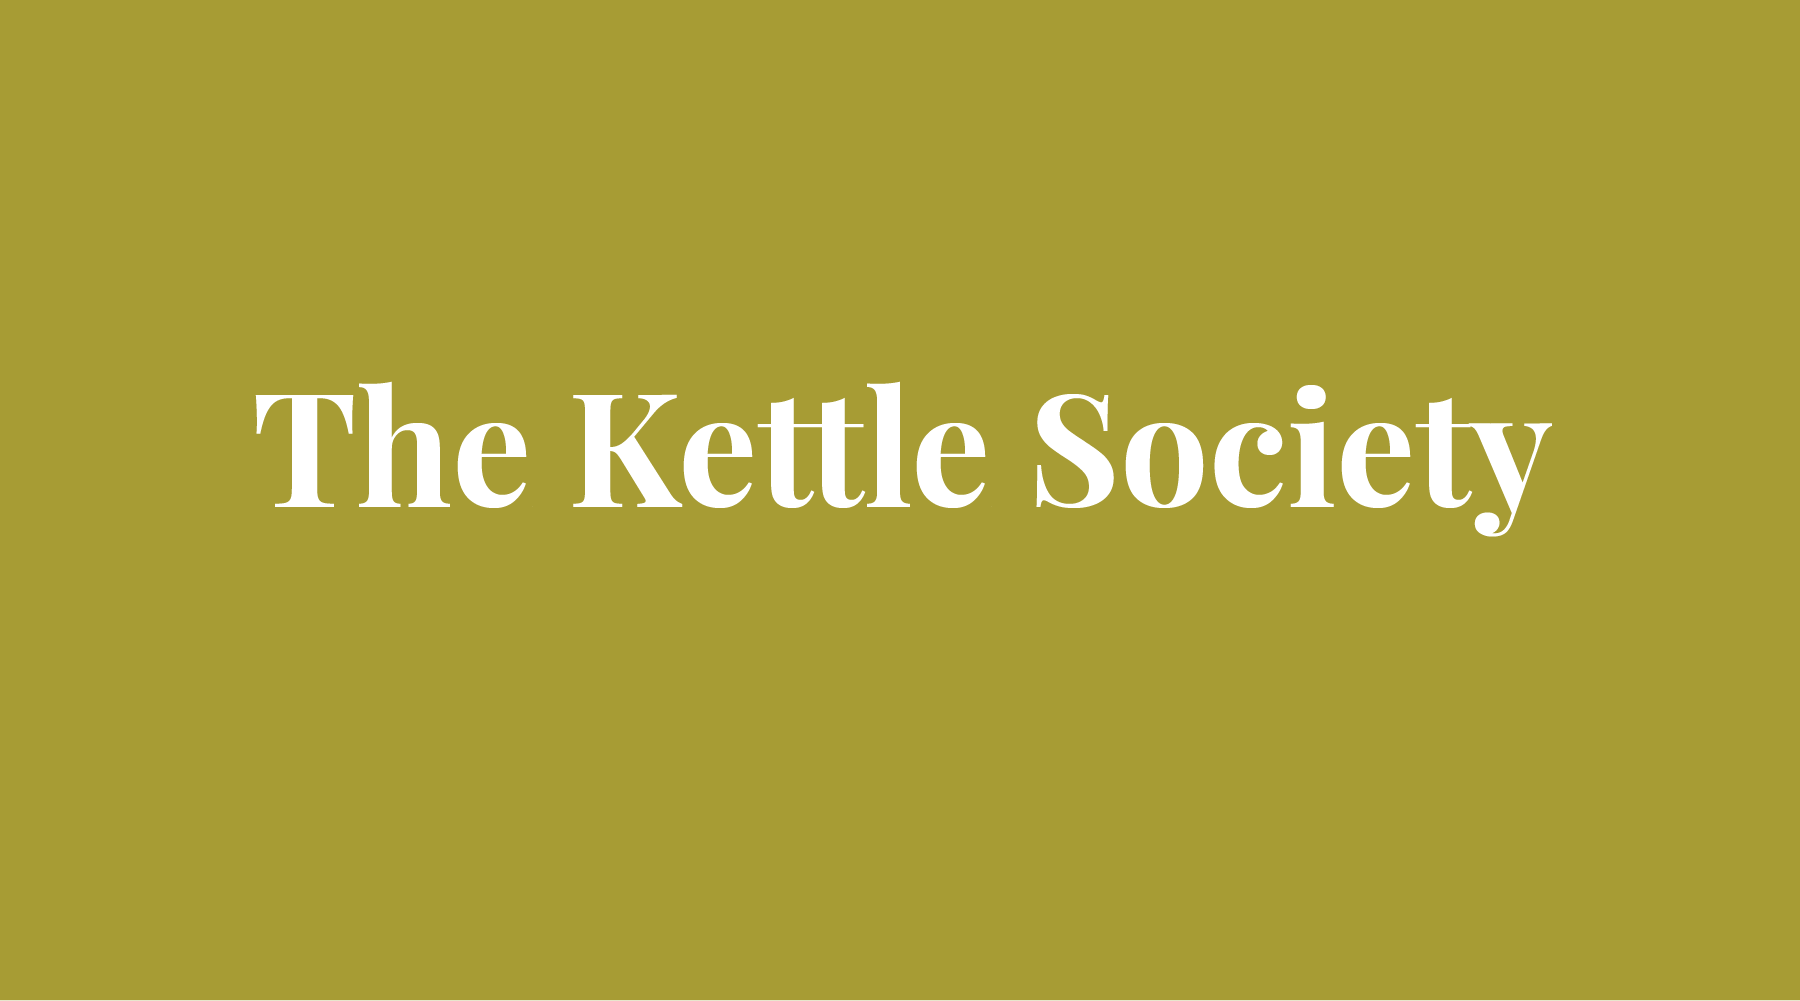 OUR JULY NON-PROFIT - The Kettle Society